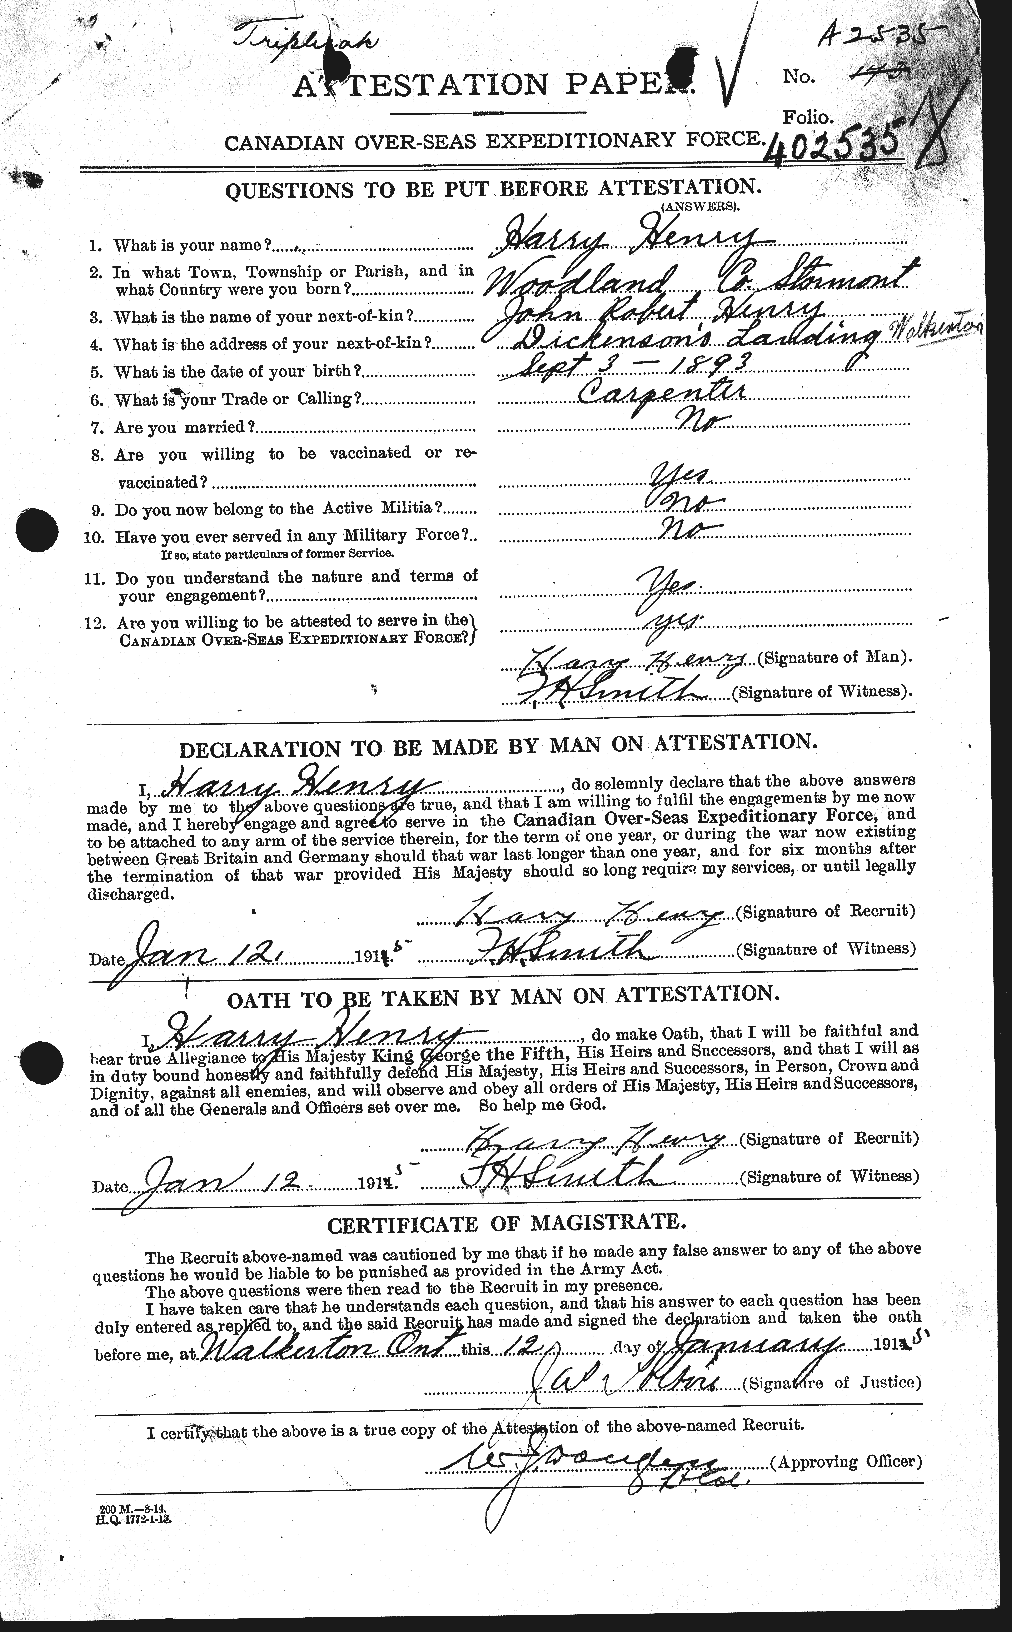 Personnel Records of the First World War - CEF 392891a